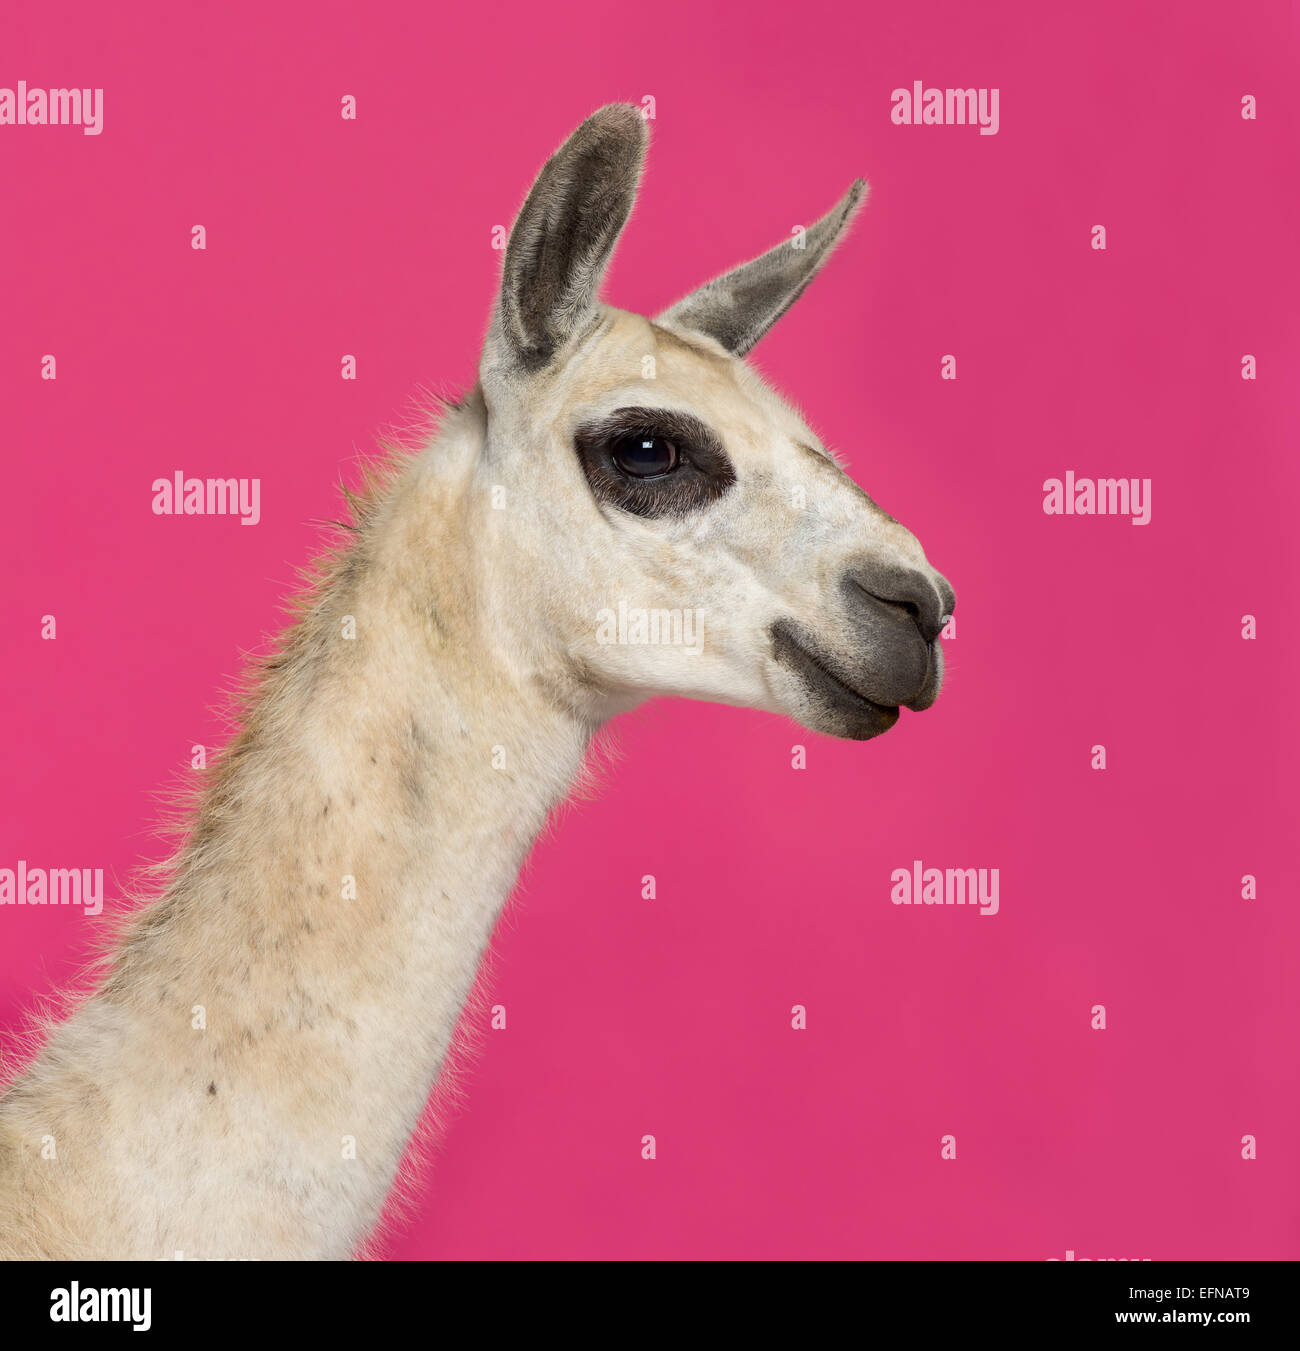 Close-up of a Llama in front of a pink background Stock Photo